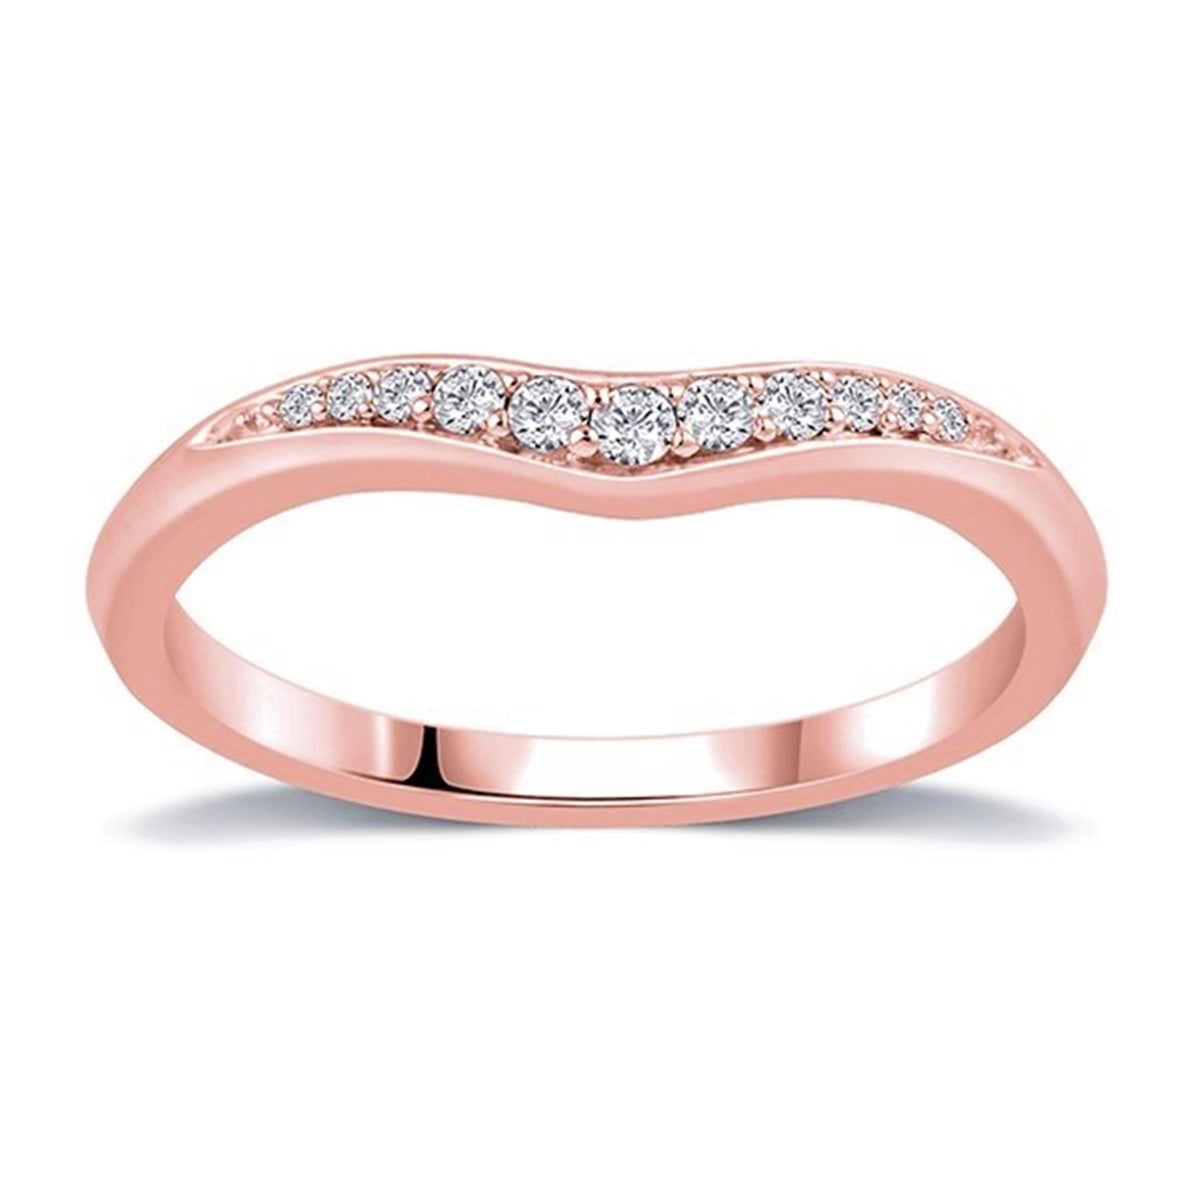 14Kt Rose Gold Curved Wedding Ring With 0.11cttw Natural Diamonds